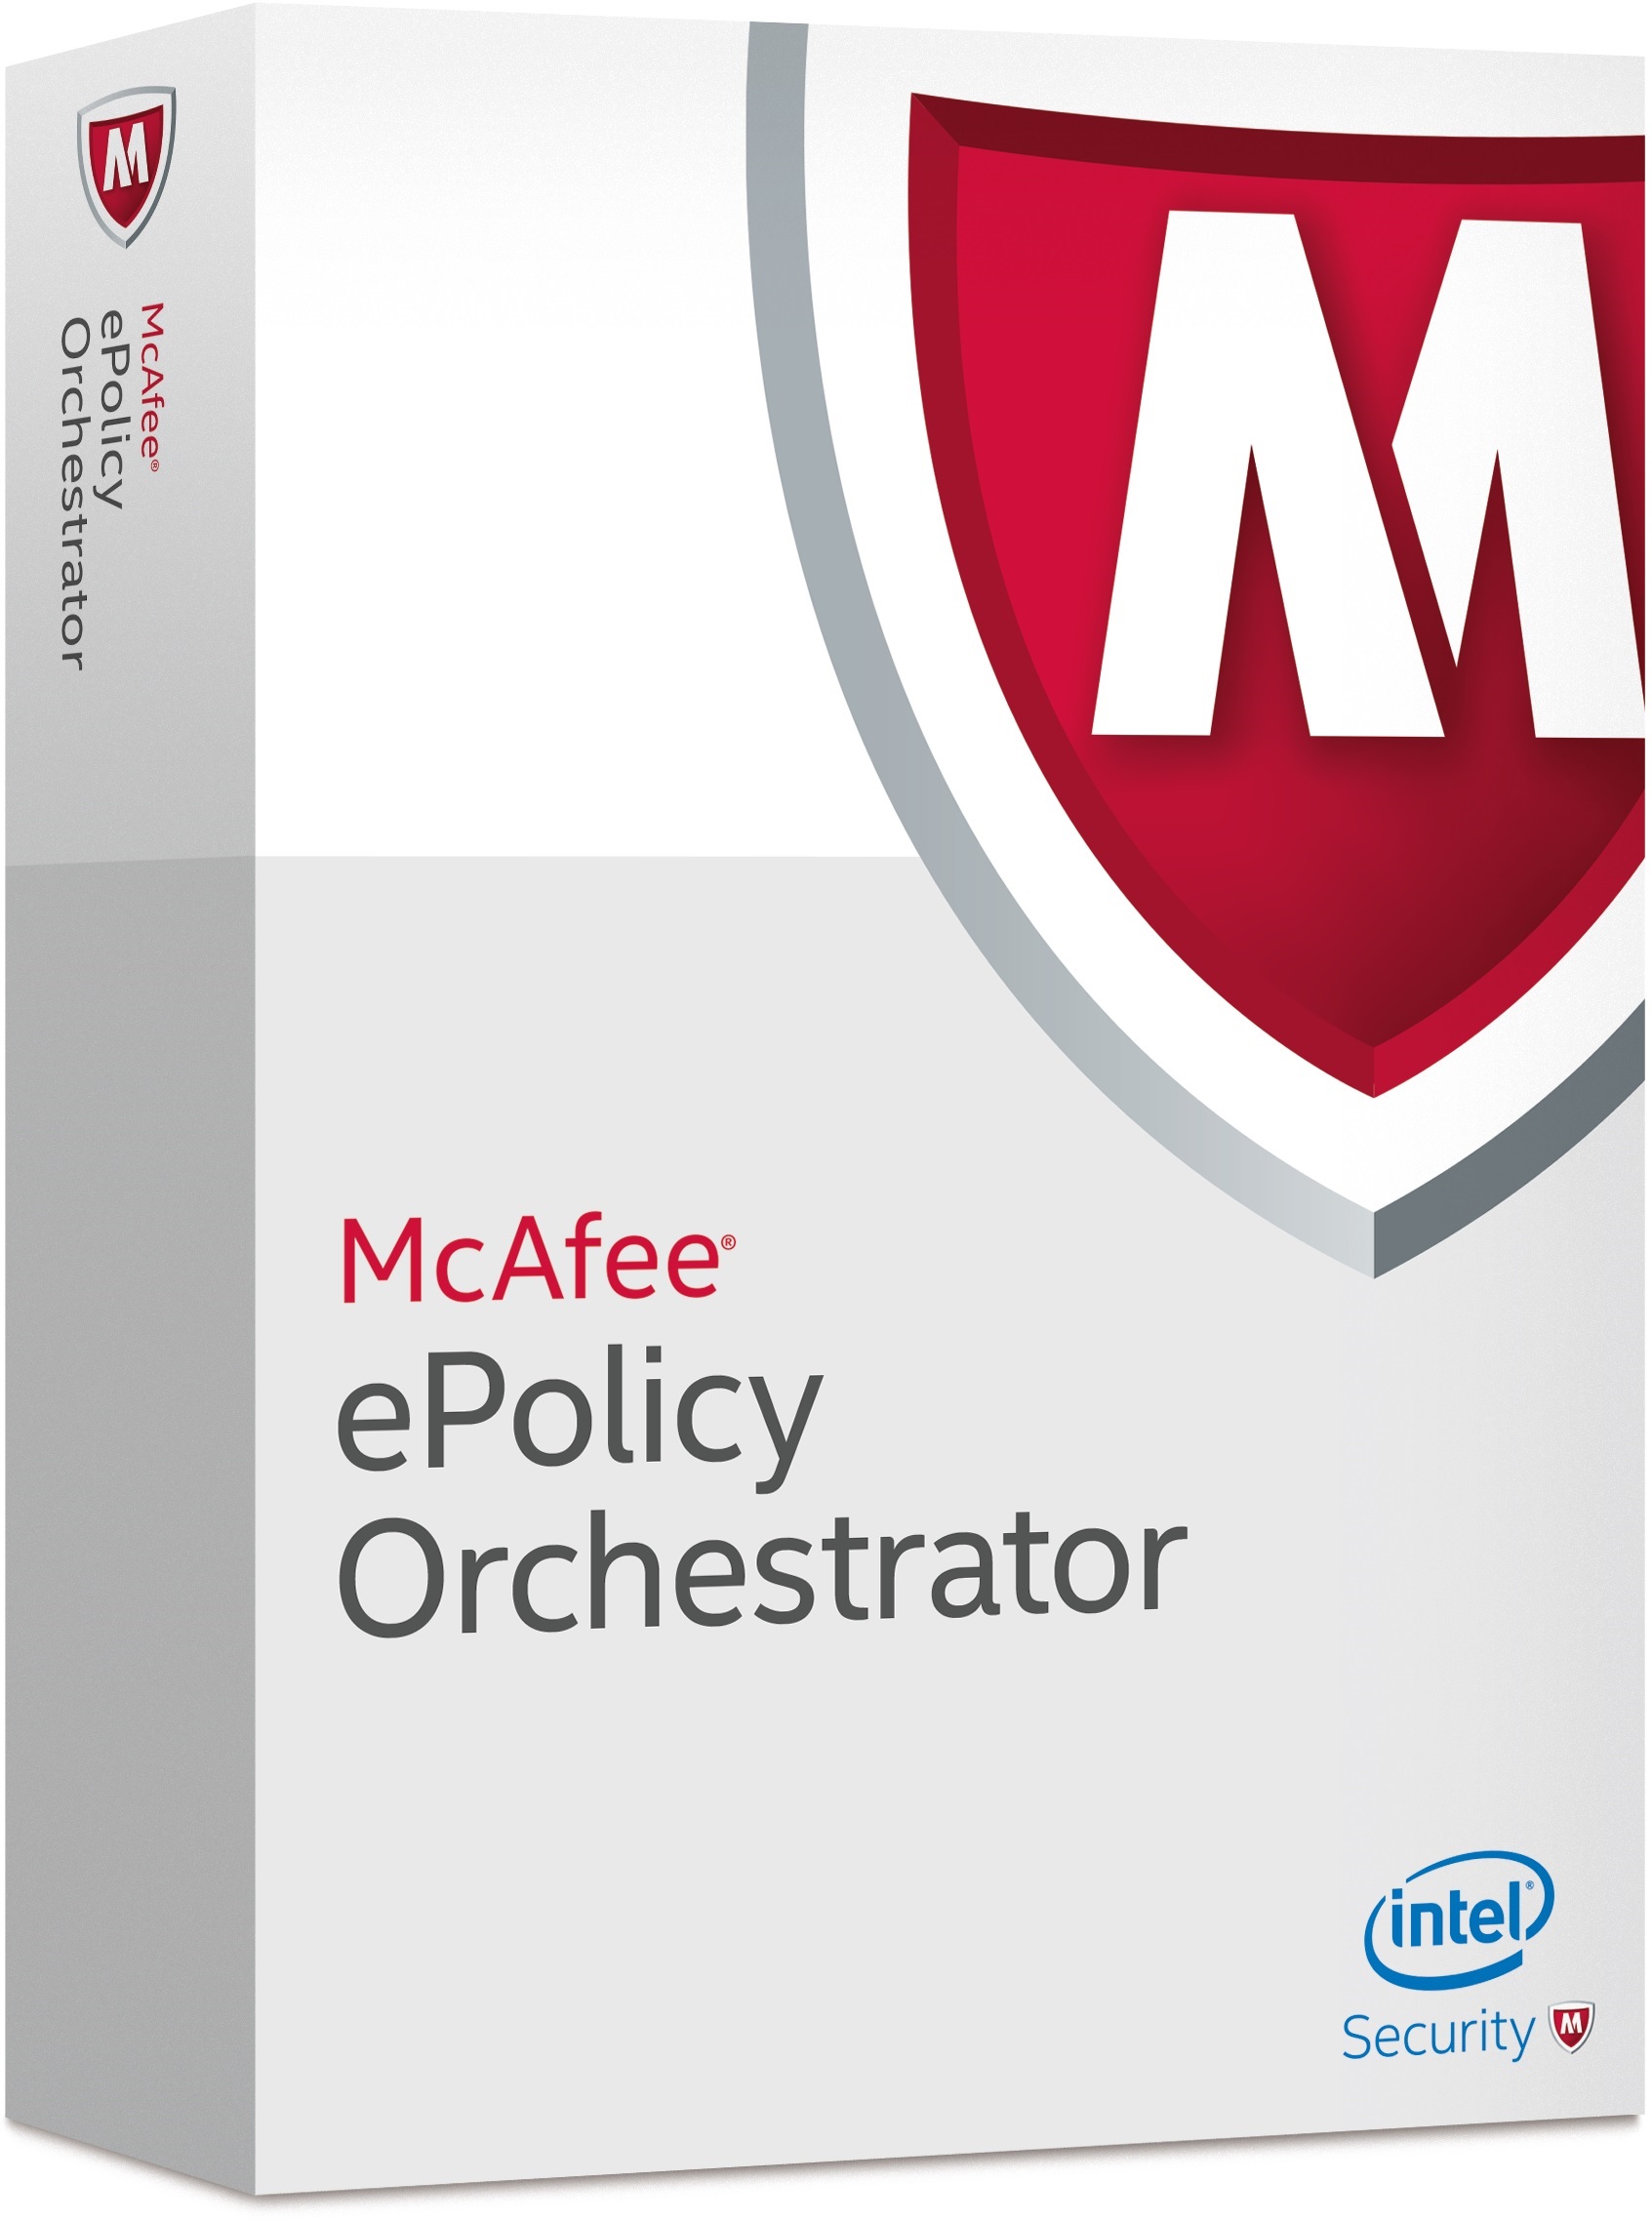 McAfee ePolicy Orchestrator inkl. 1 Jahr Gold Support Win, Multilingual (Lizenzstaffel 51-100 User) (EPOCDE-AA-CA)